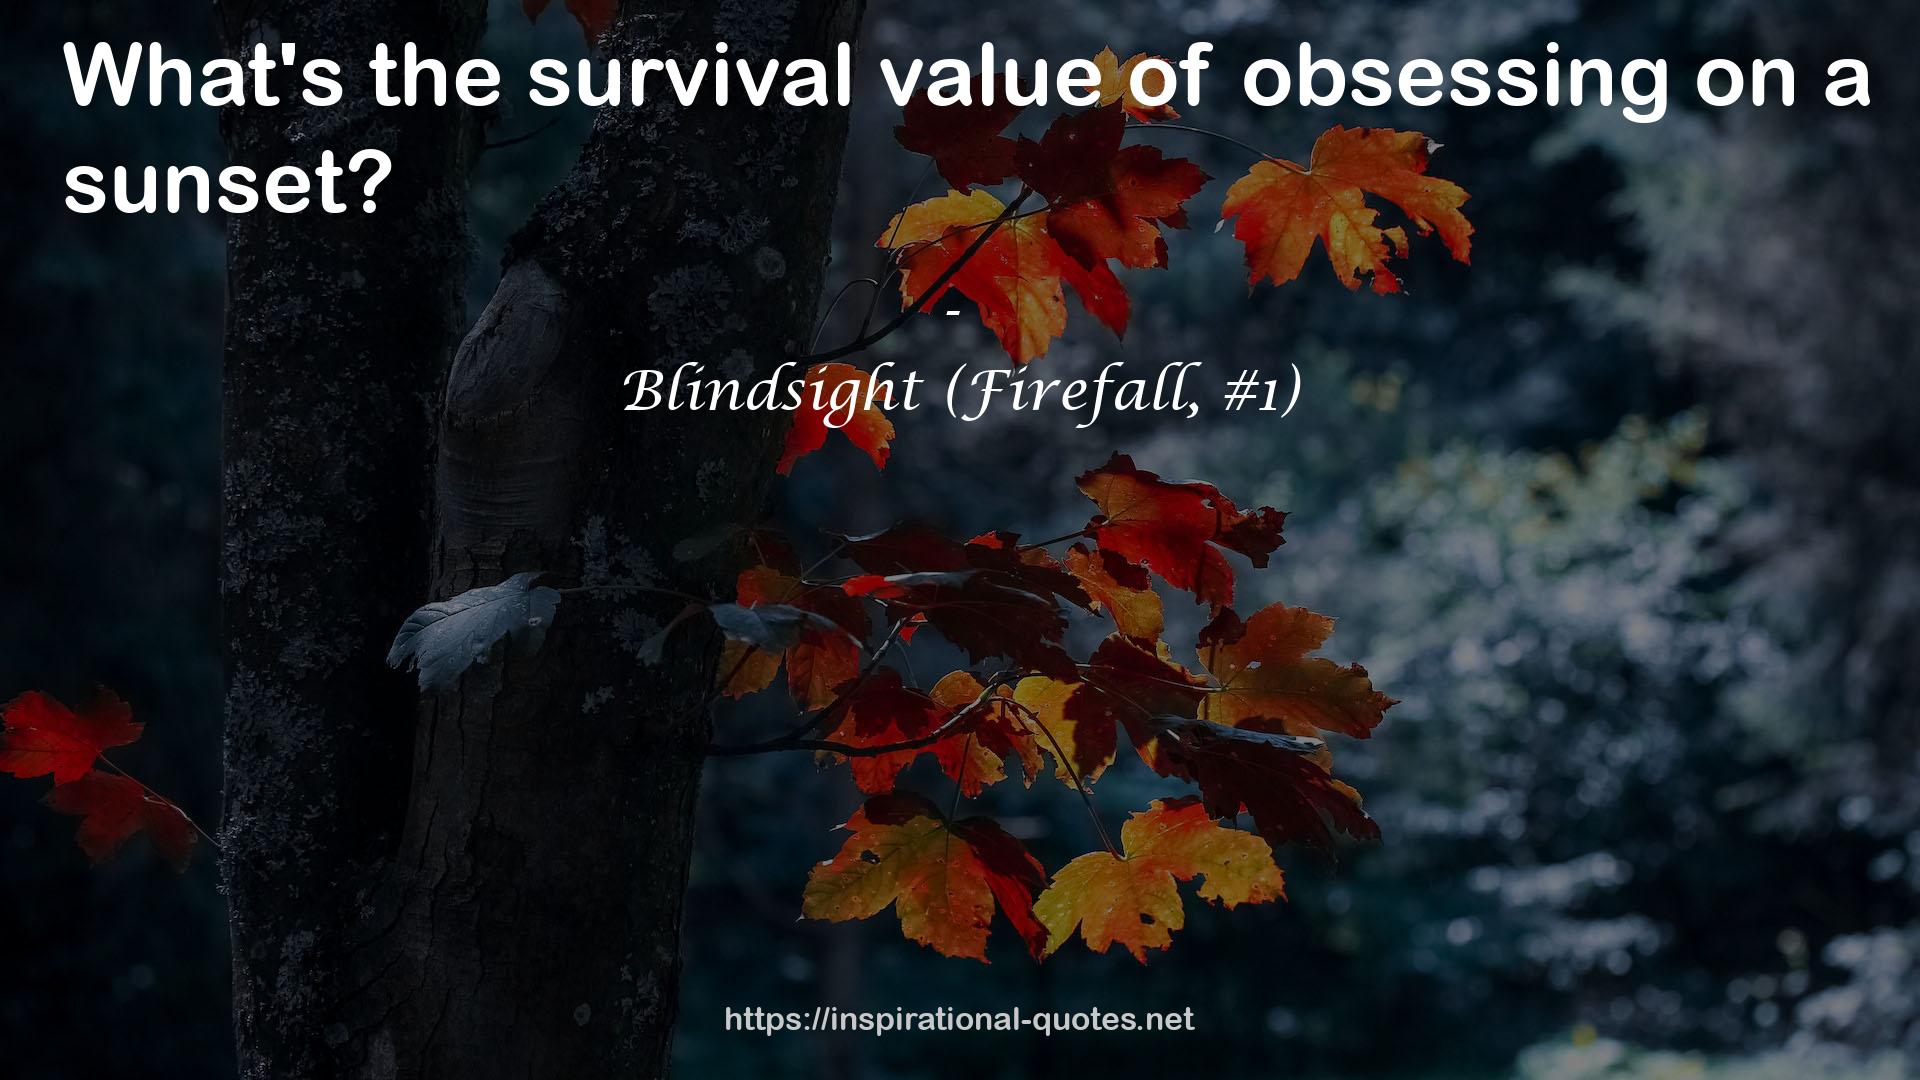 Blindsight (Firefall, #1) QUOTES